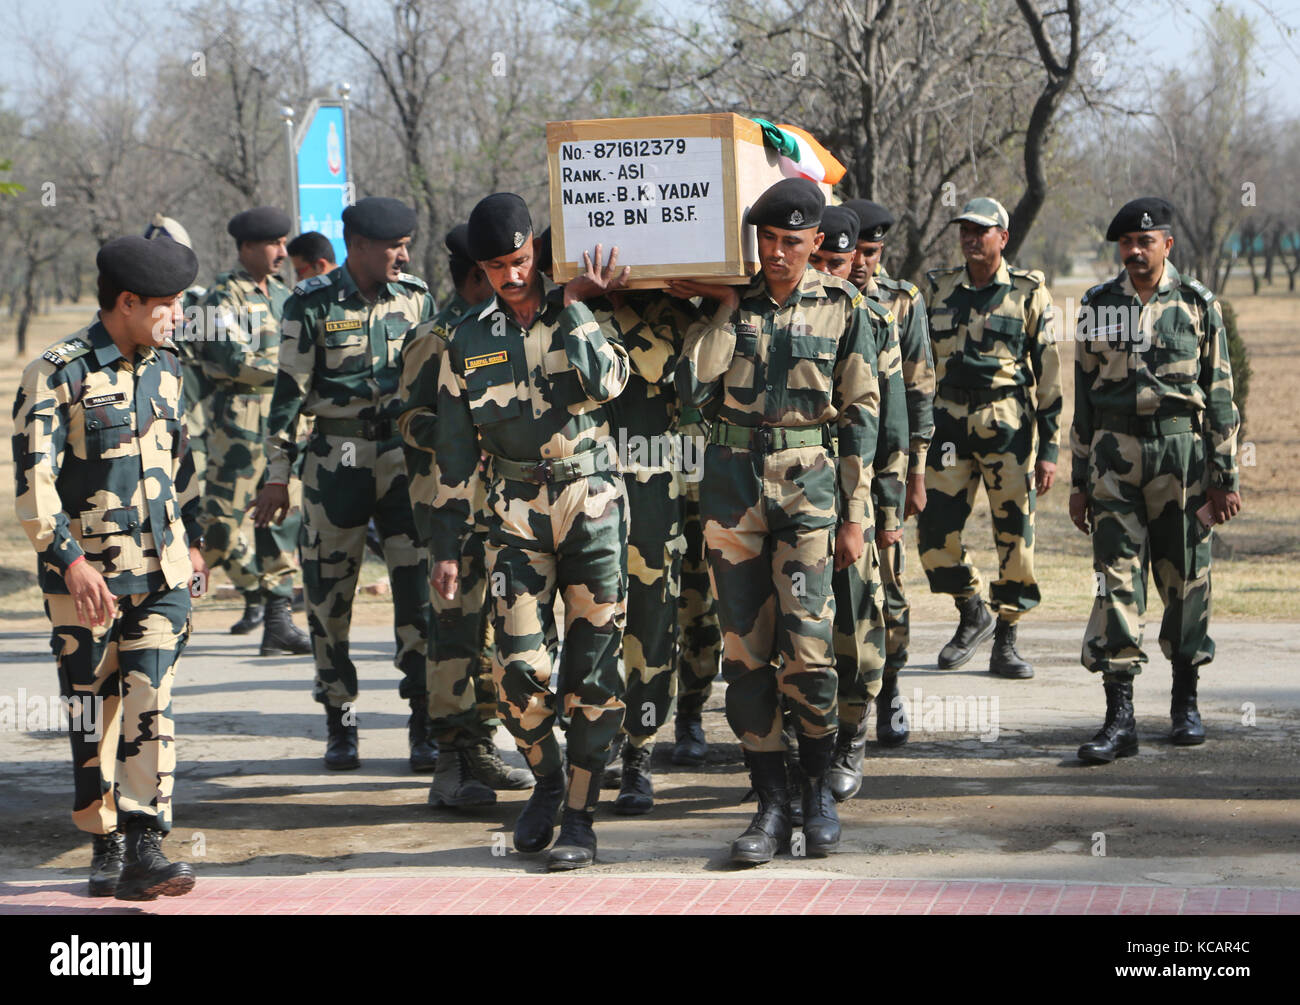 Srinagar, Kashmir. 4th October, 2017. Border guards of India's Border Security Force (BSF) carry the coffin of their colleague who was killed in a militant attack during the wreath laying ceremony at a BSF base camp on the outskirts of Srinagar, summer capital of Kashmir. An Indian border guard and two militants were killed, while as three others and a policeman were wounded Tuesday in a predawn militant attack on India's BSF camp in restive Kashmir, police said. Credit: Javed Dar/Xinhua/Alamy Live News Stock Photo